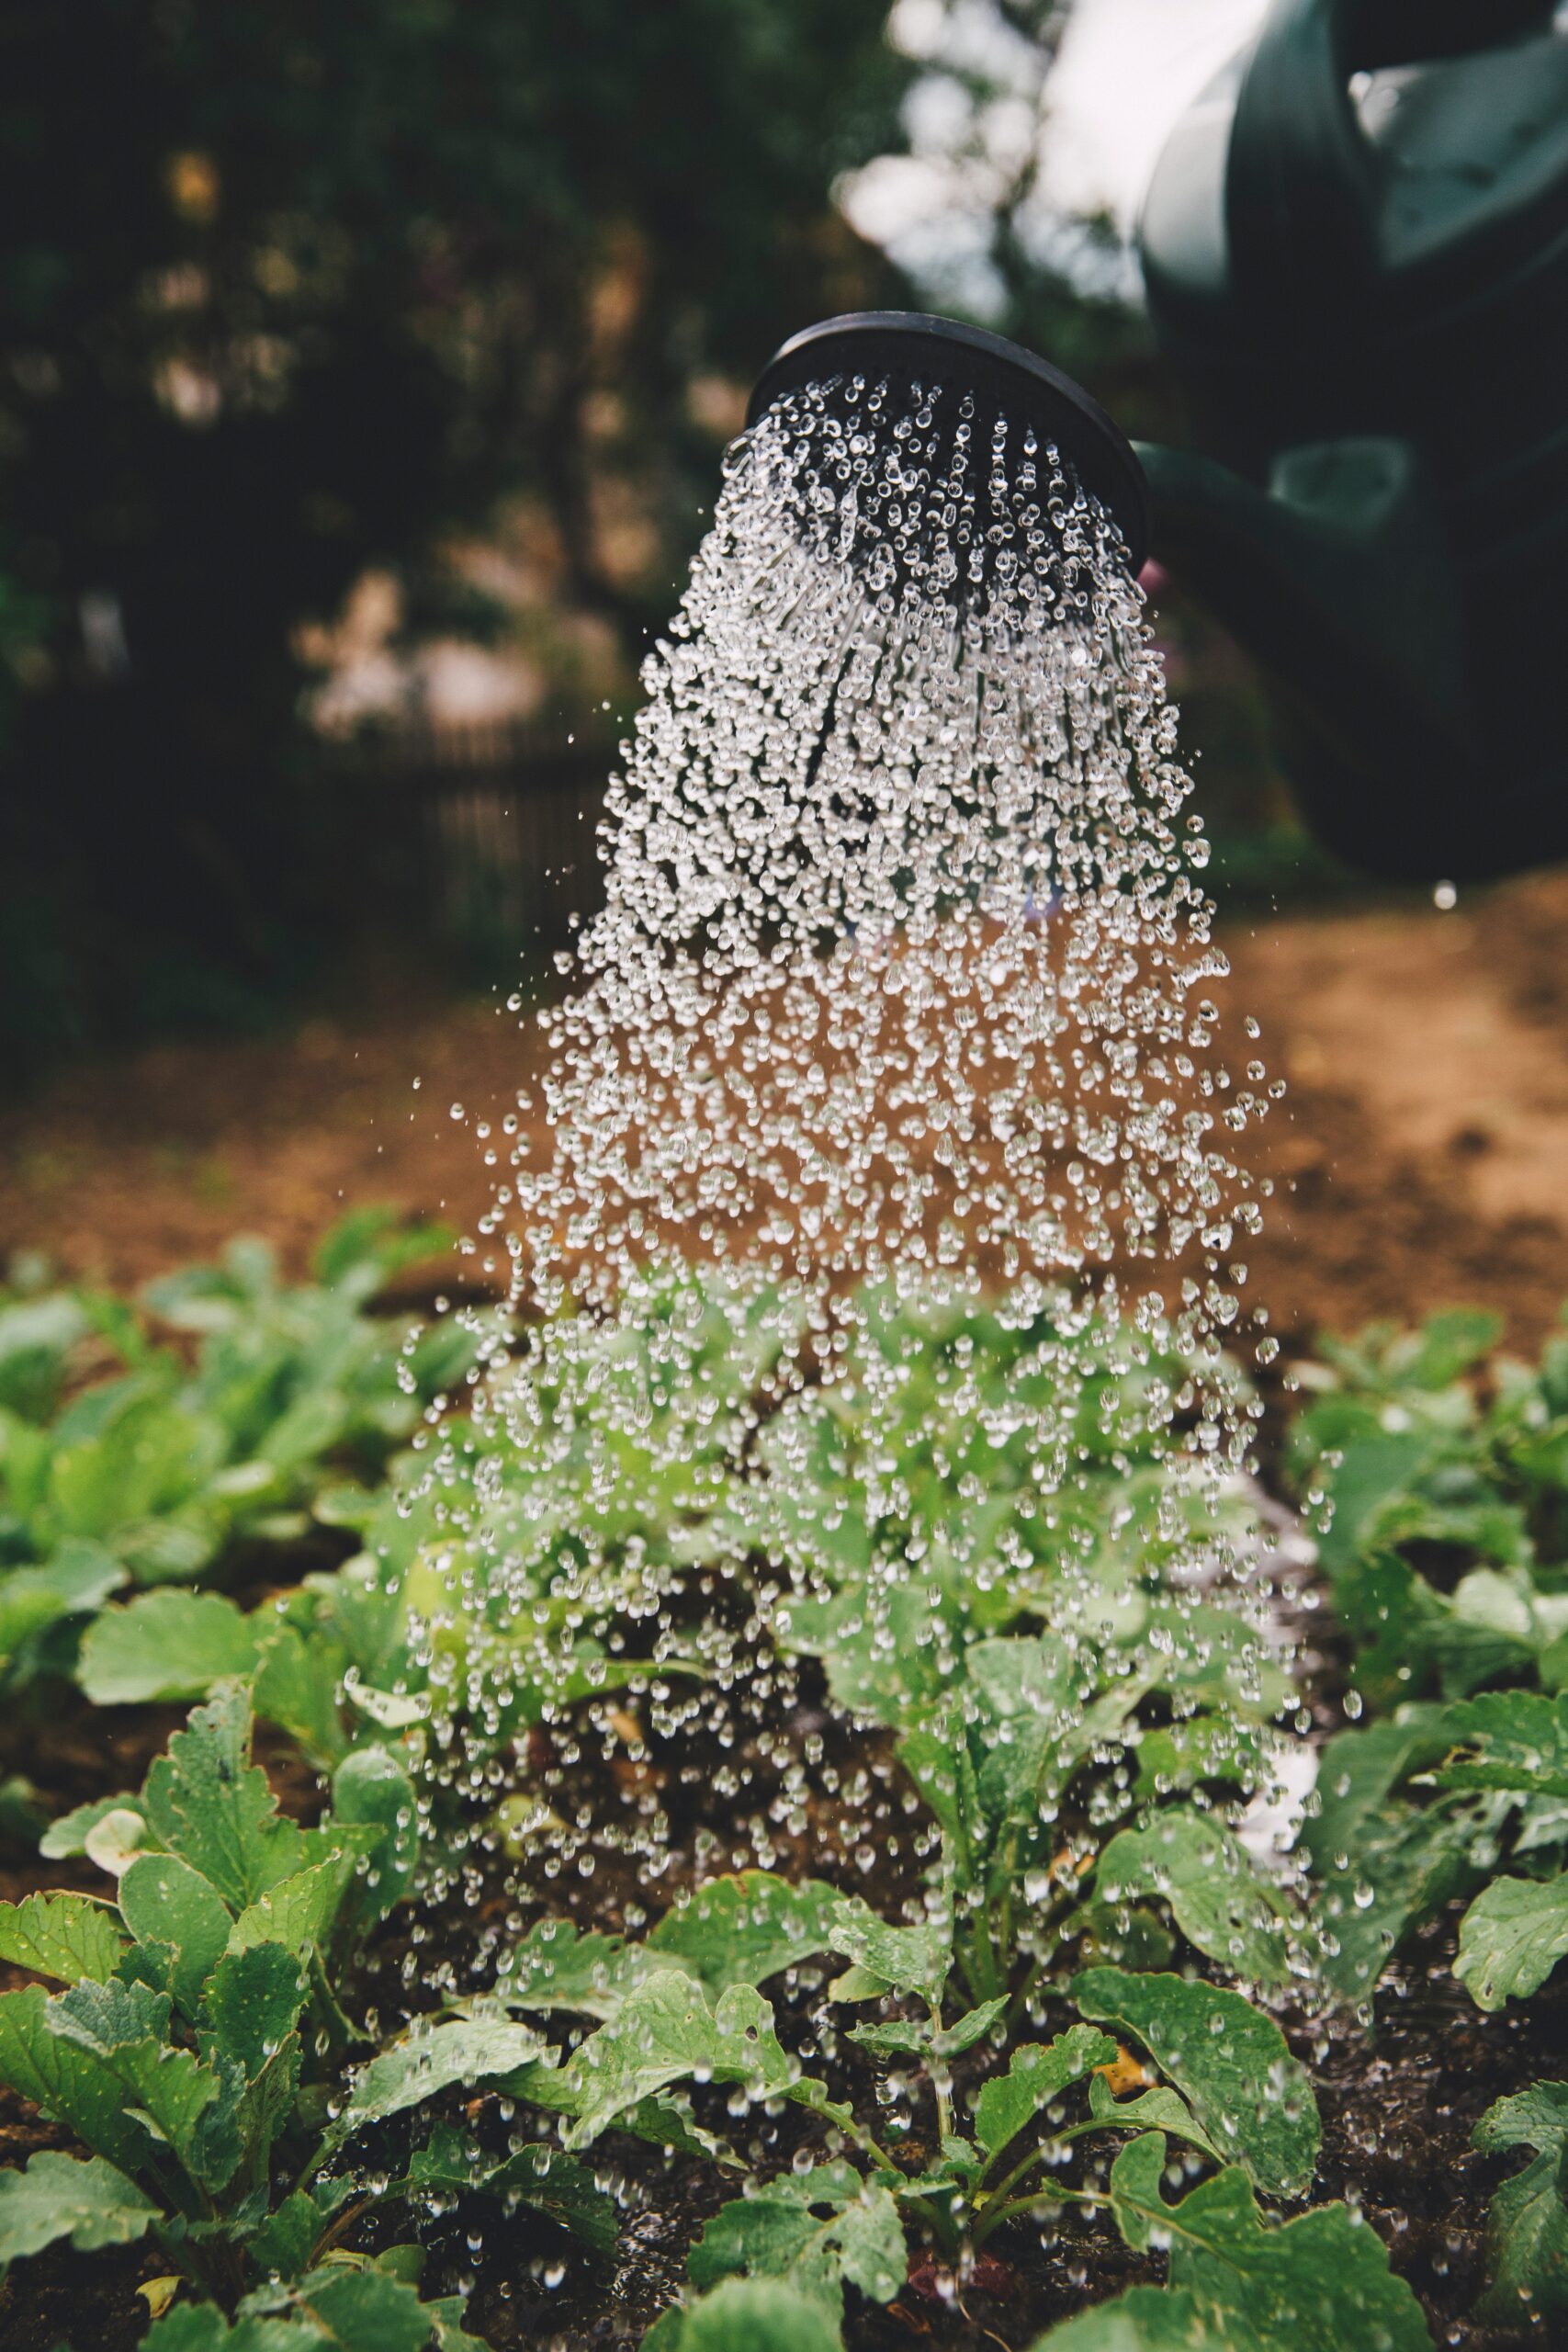 watering your lawn and garden plants